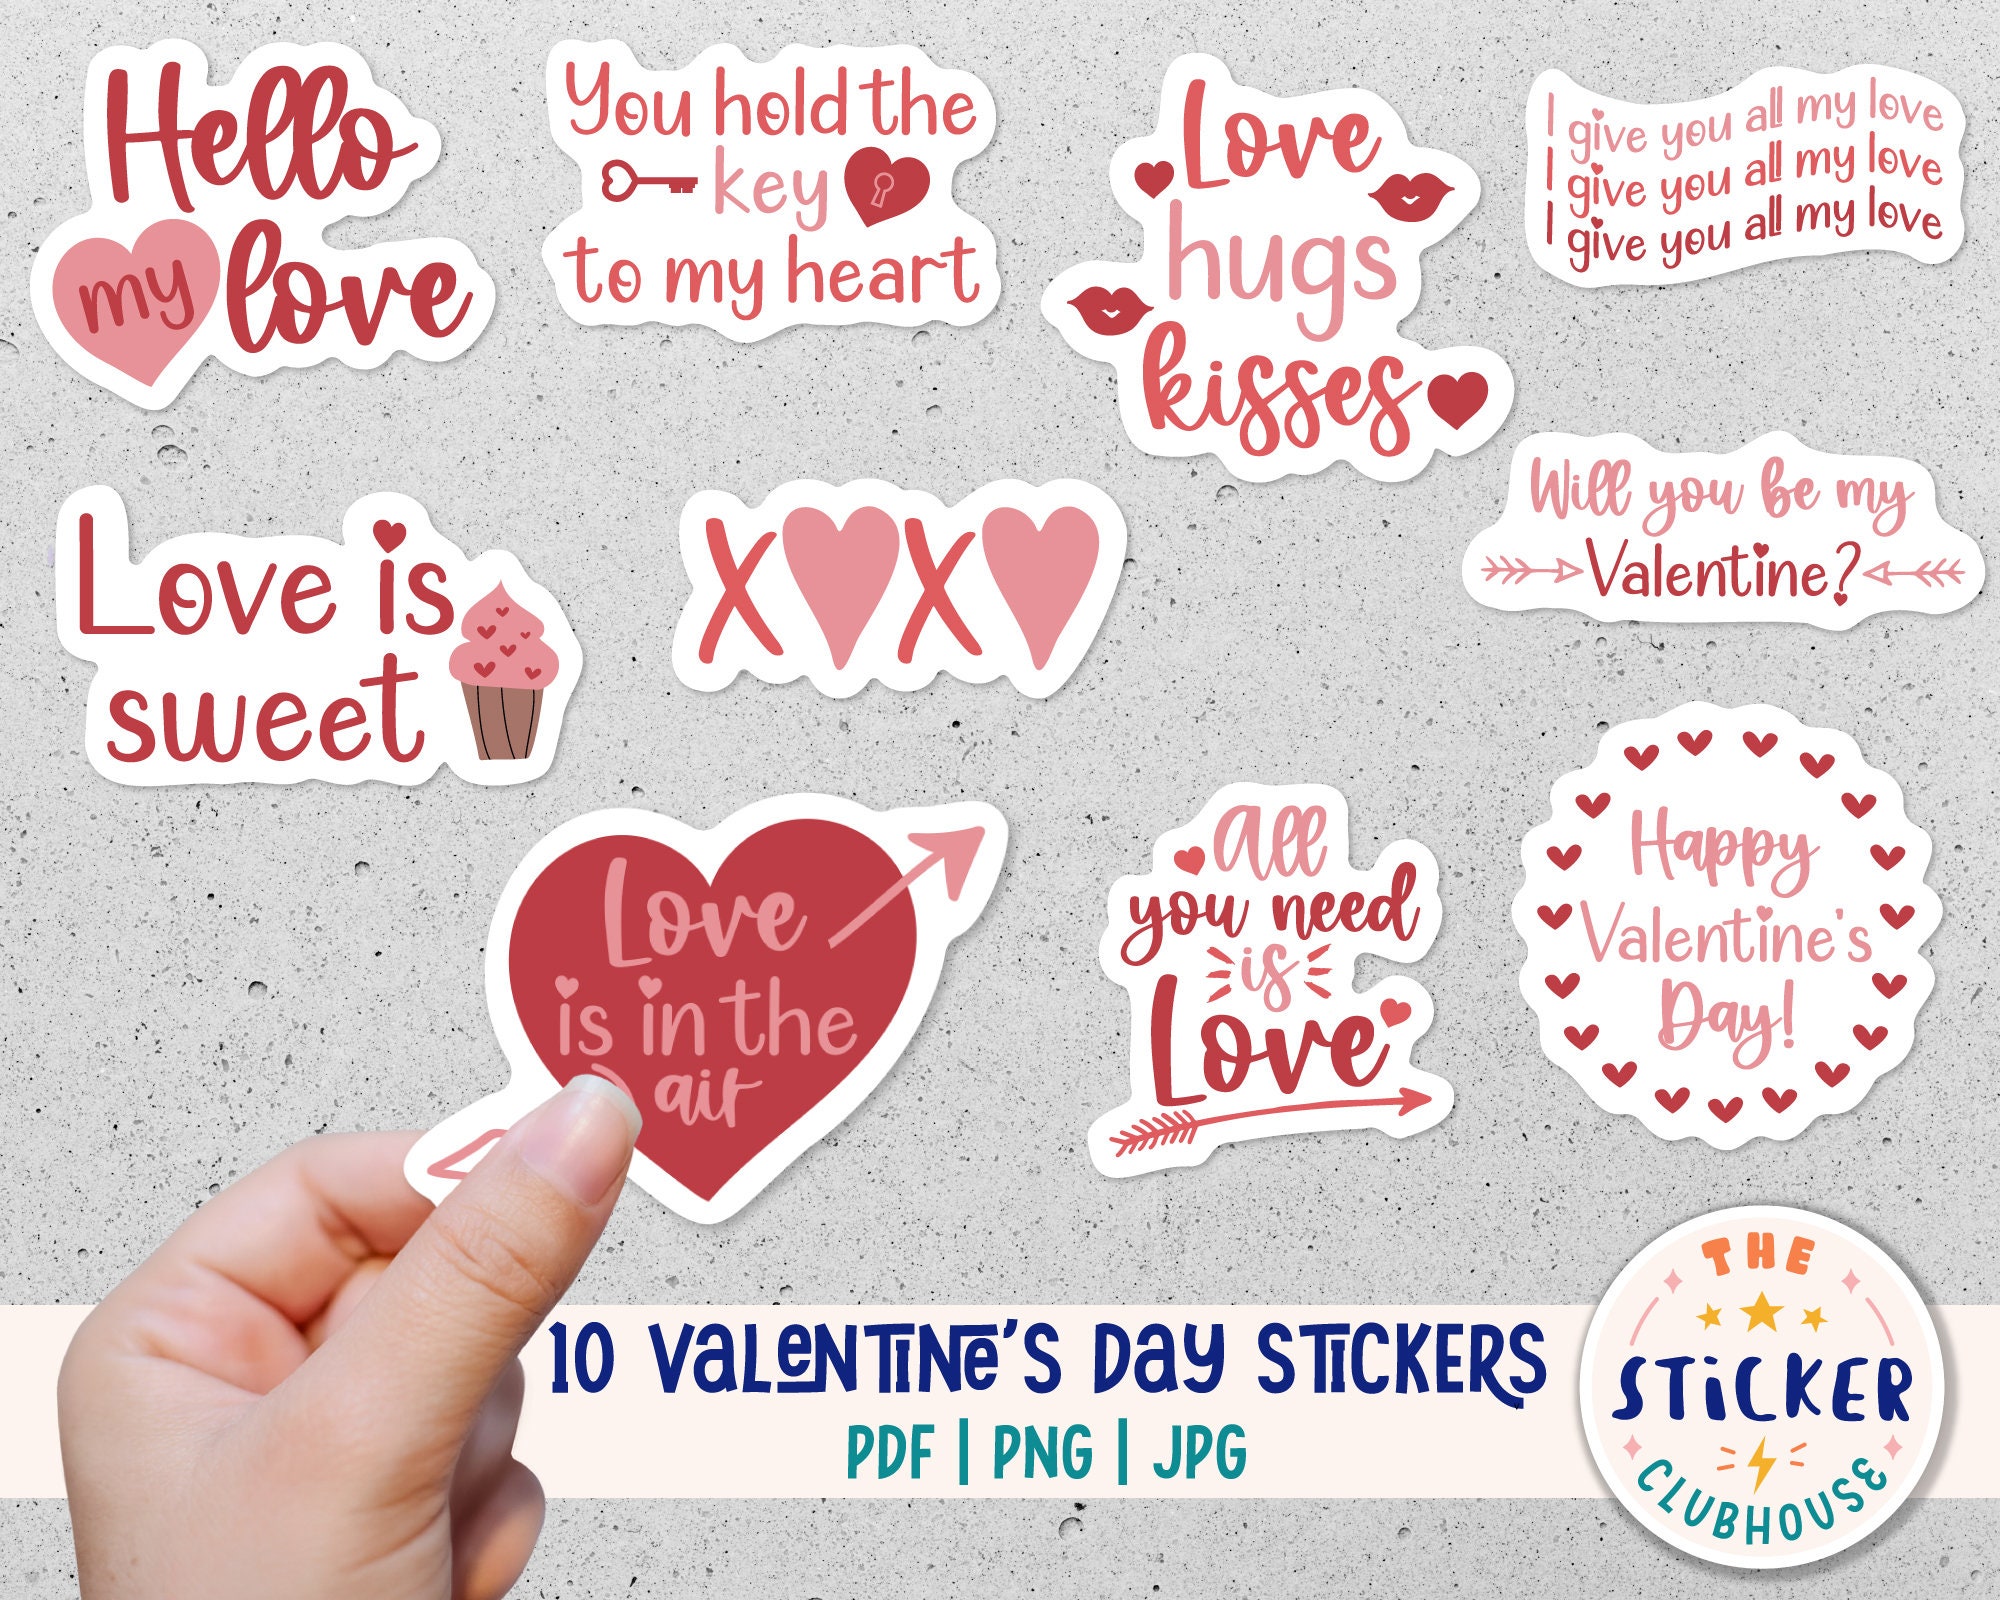 Funny Stickers Snarky Heart Sticker Valentines Day Stickers